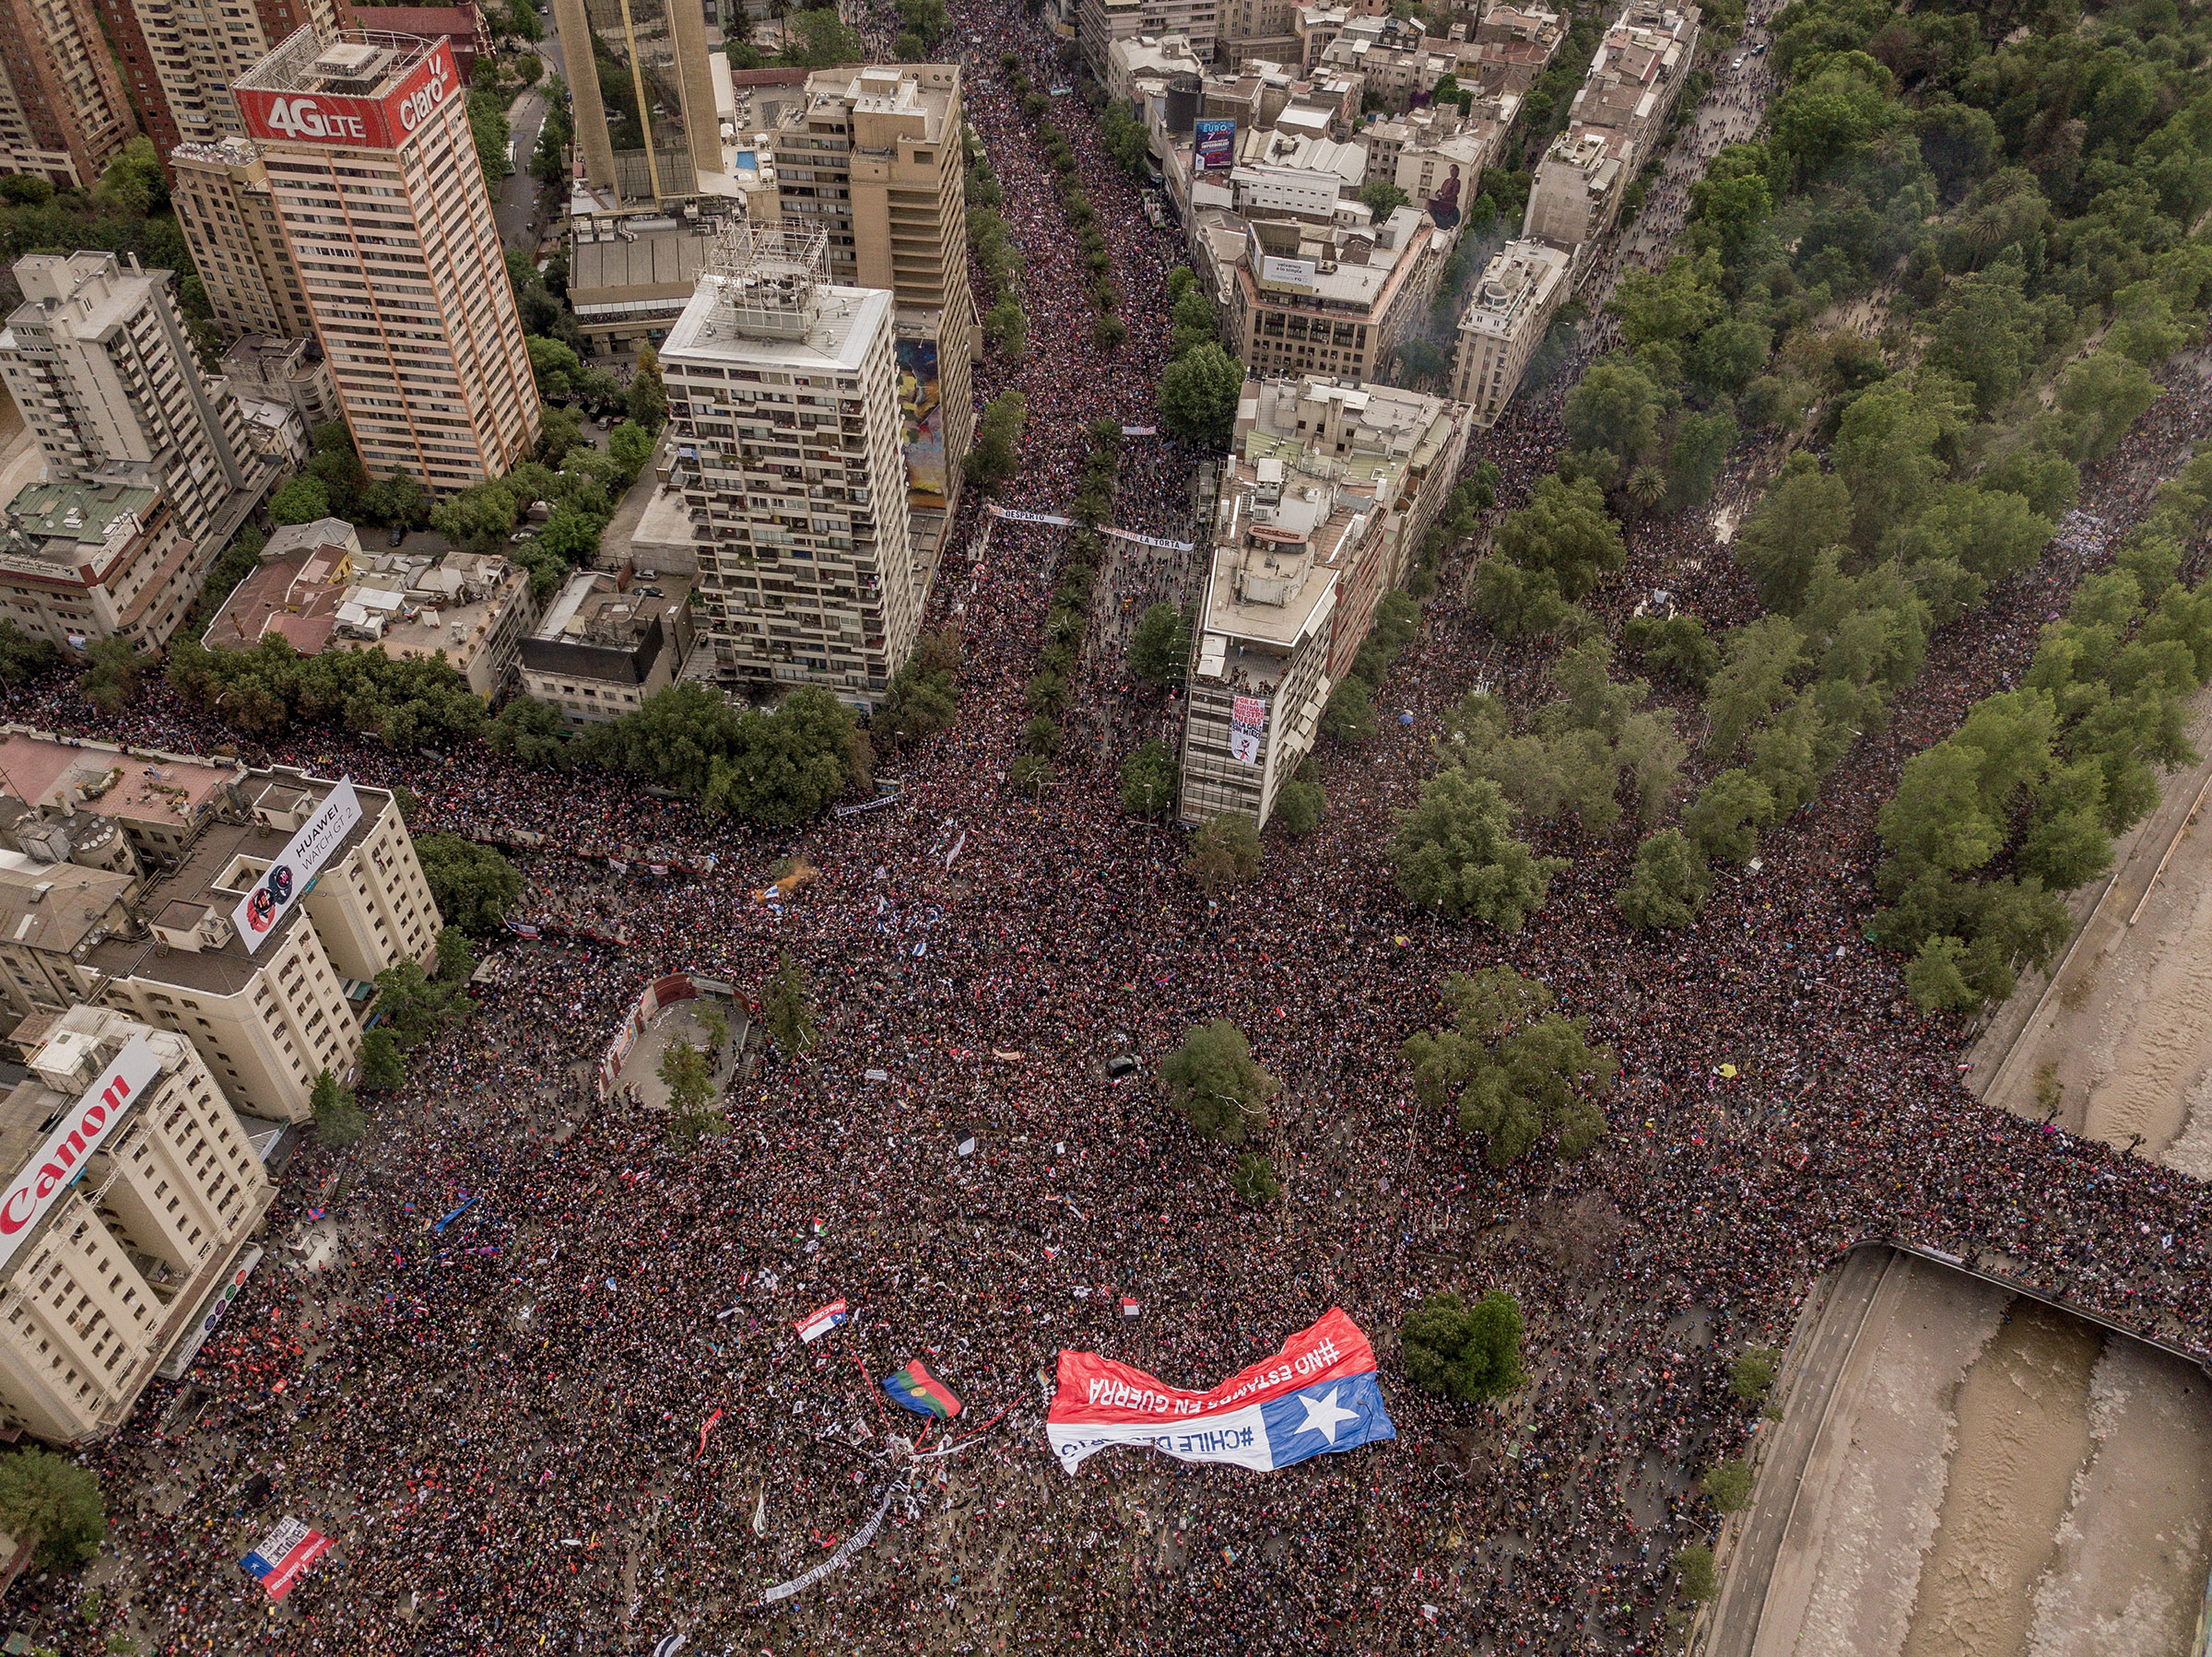 Protesters take to the streets in Santiago, Chile, on Oct. 25, 2019.